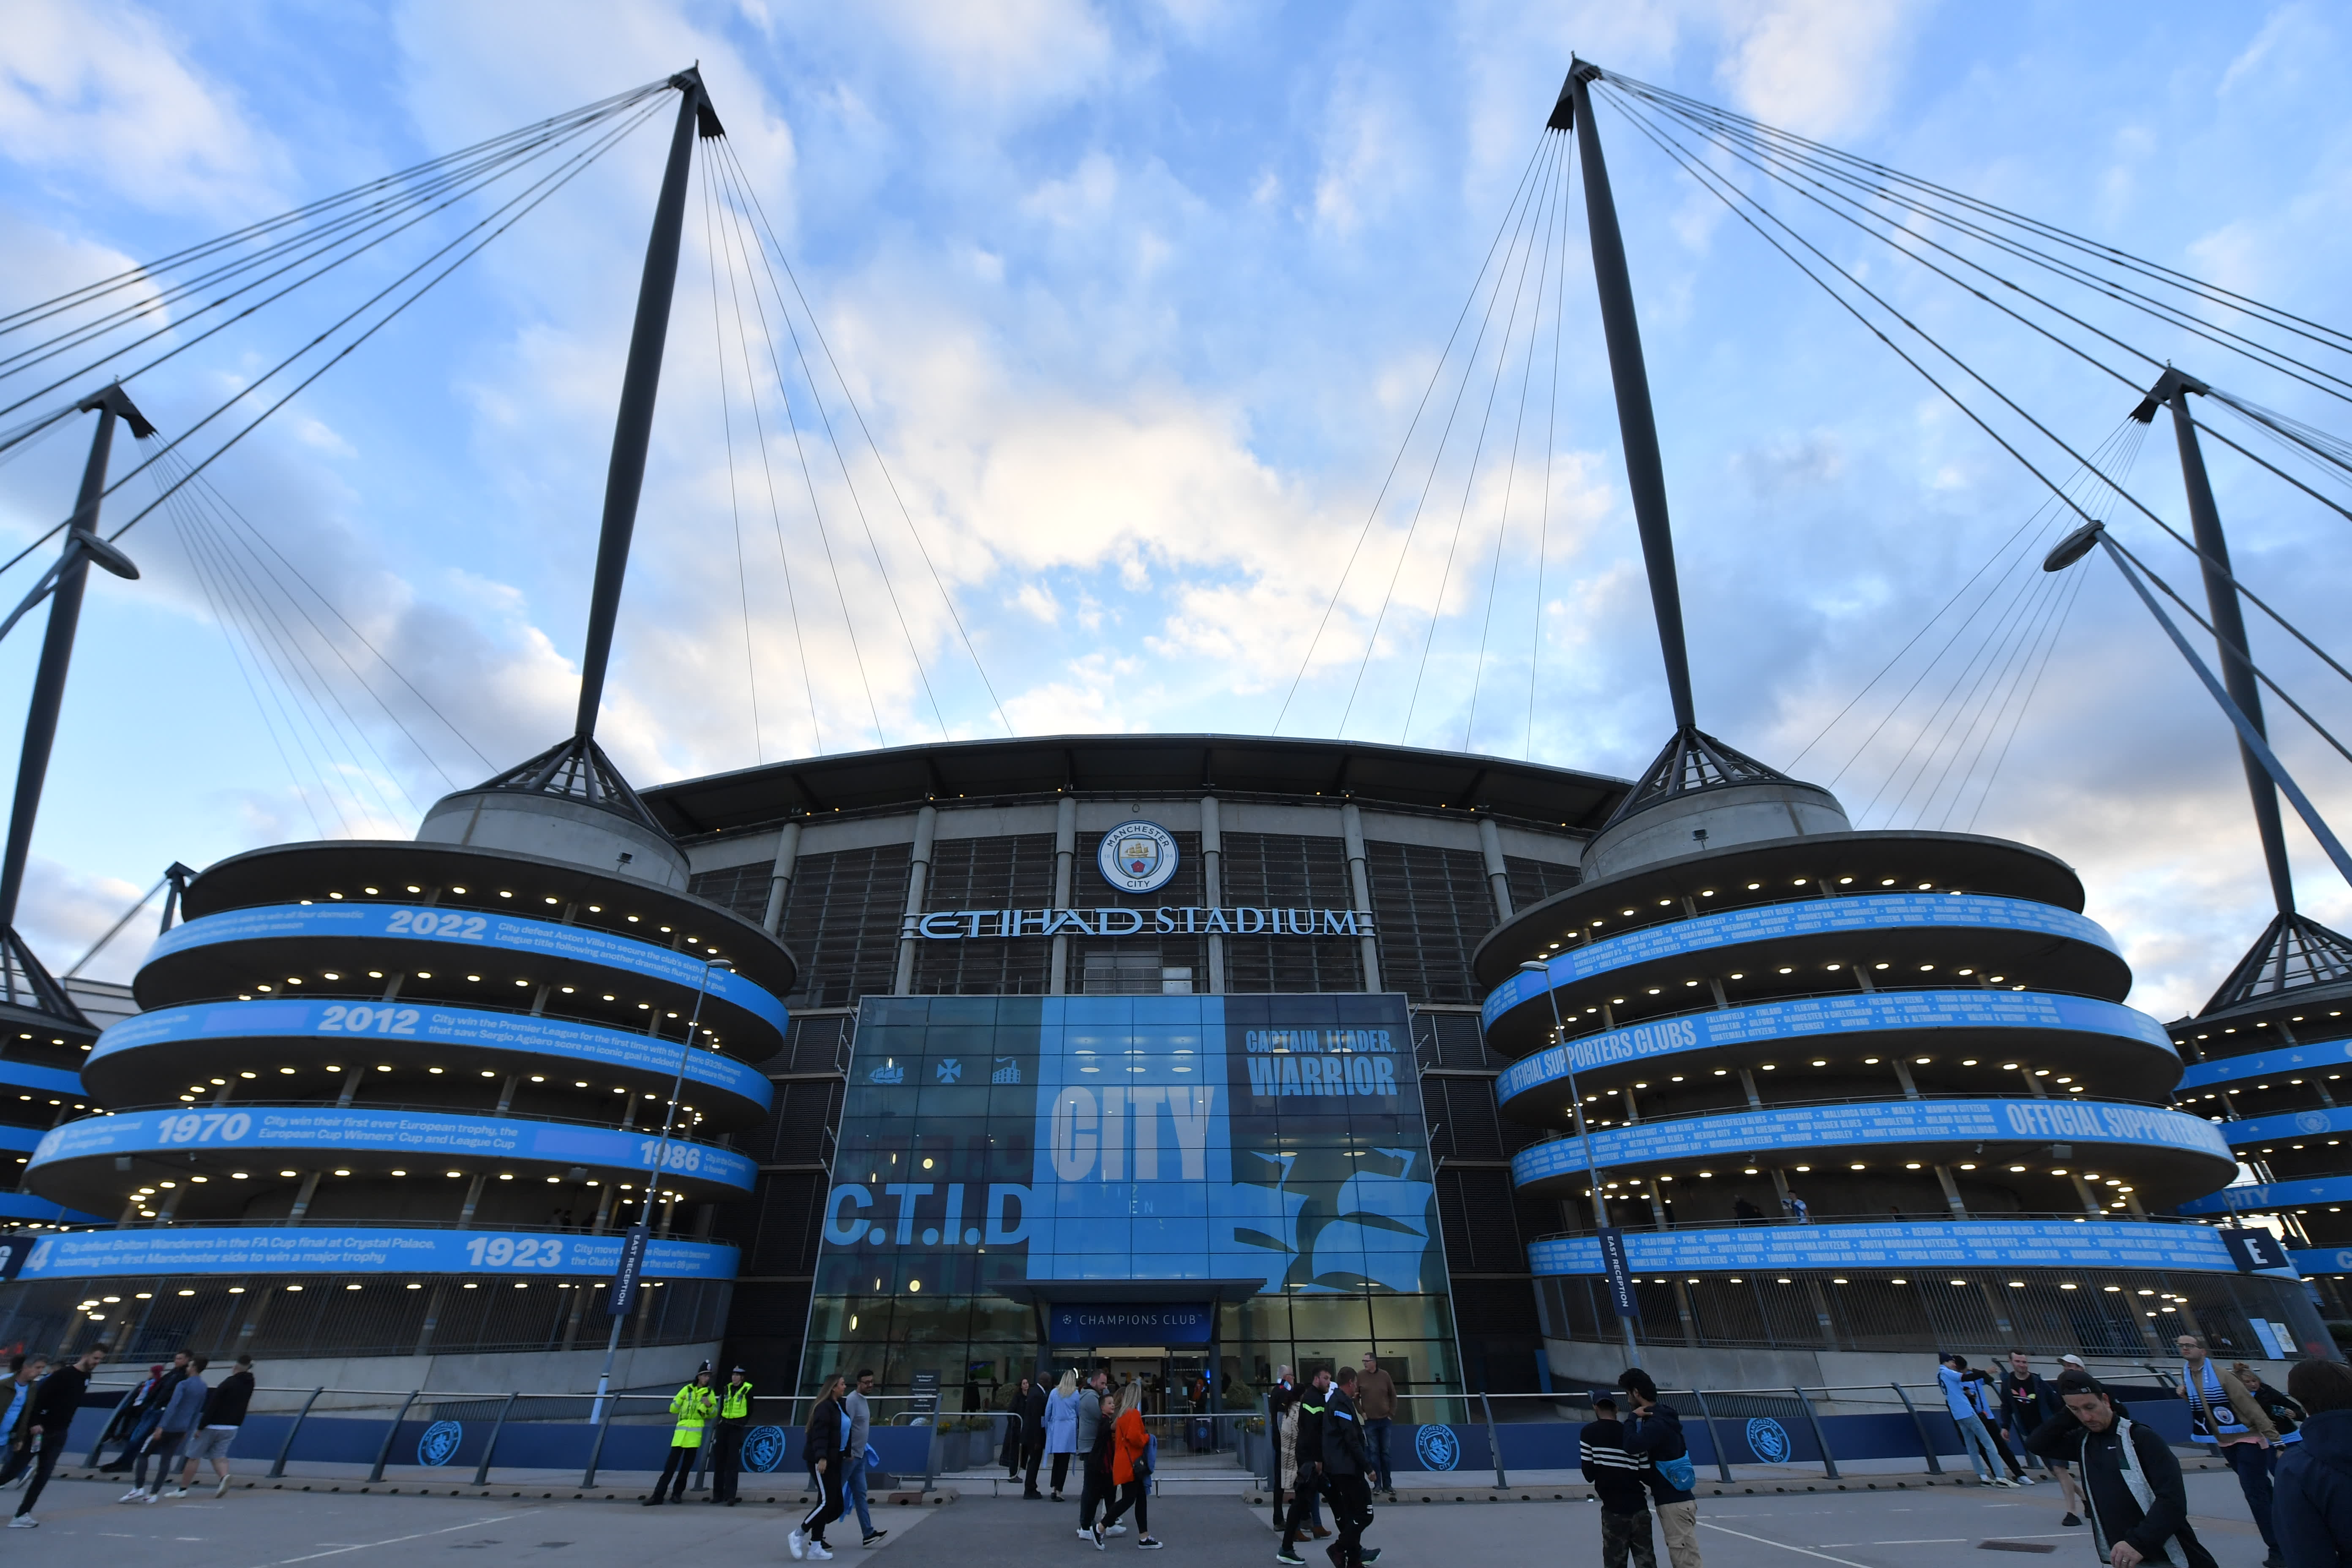 Premier League accuses Manchester City of breaching financial rules